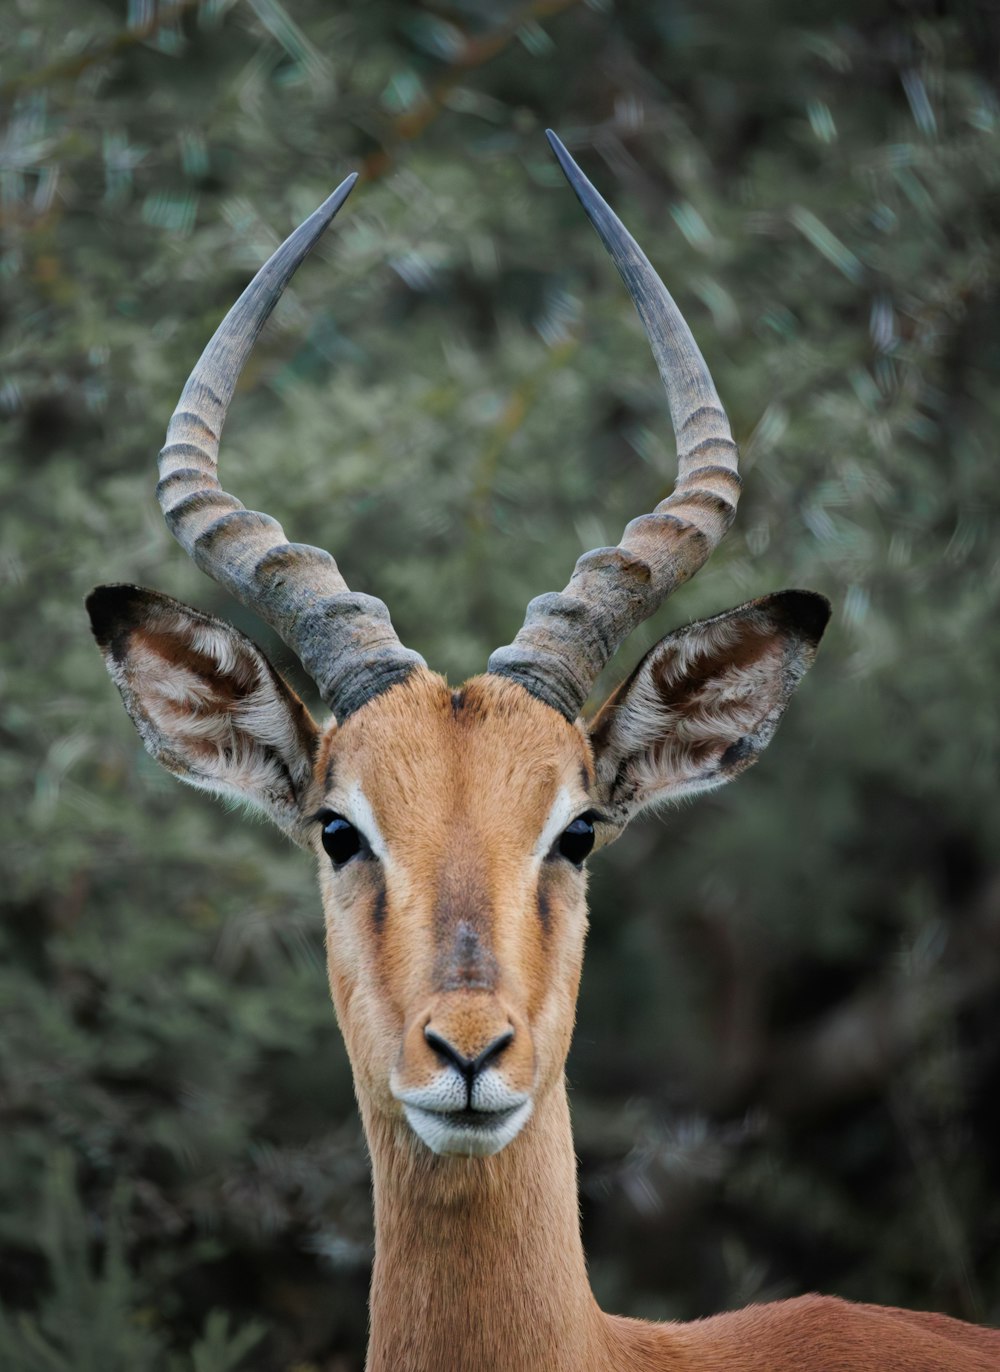 a close up of a deer with large horns